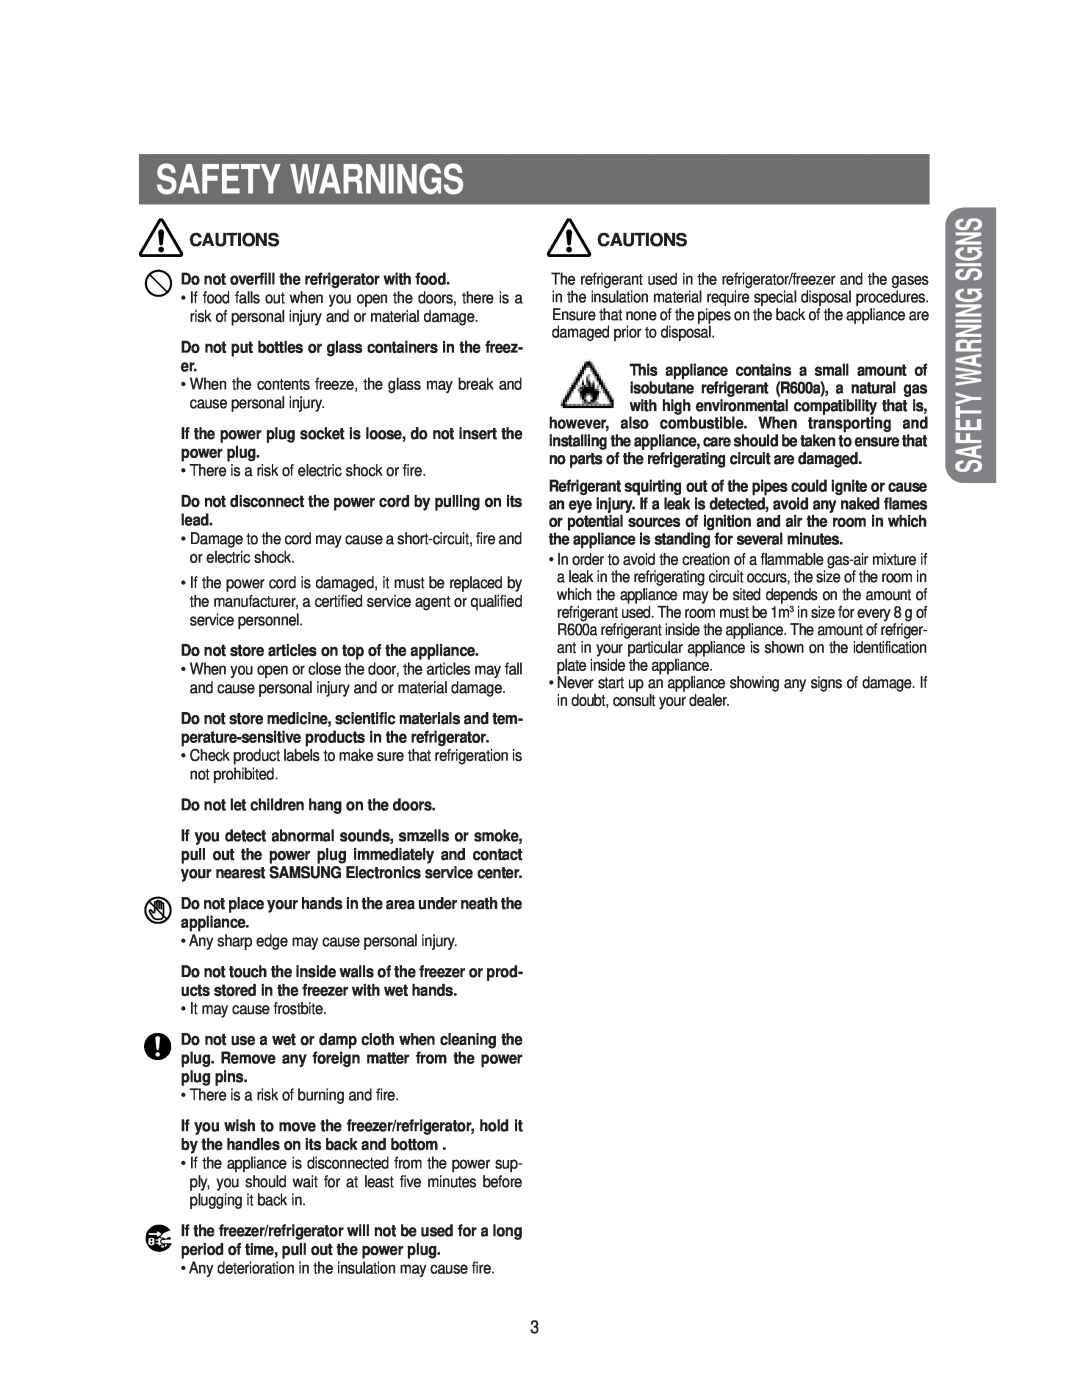 Samsung RS20**** owner manual Safety Warning Signs, Cautions, Safety Warnings 